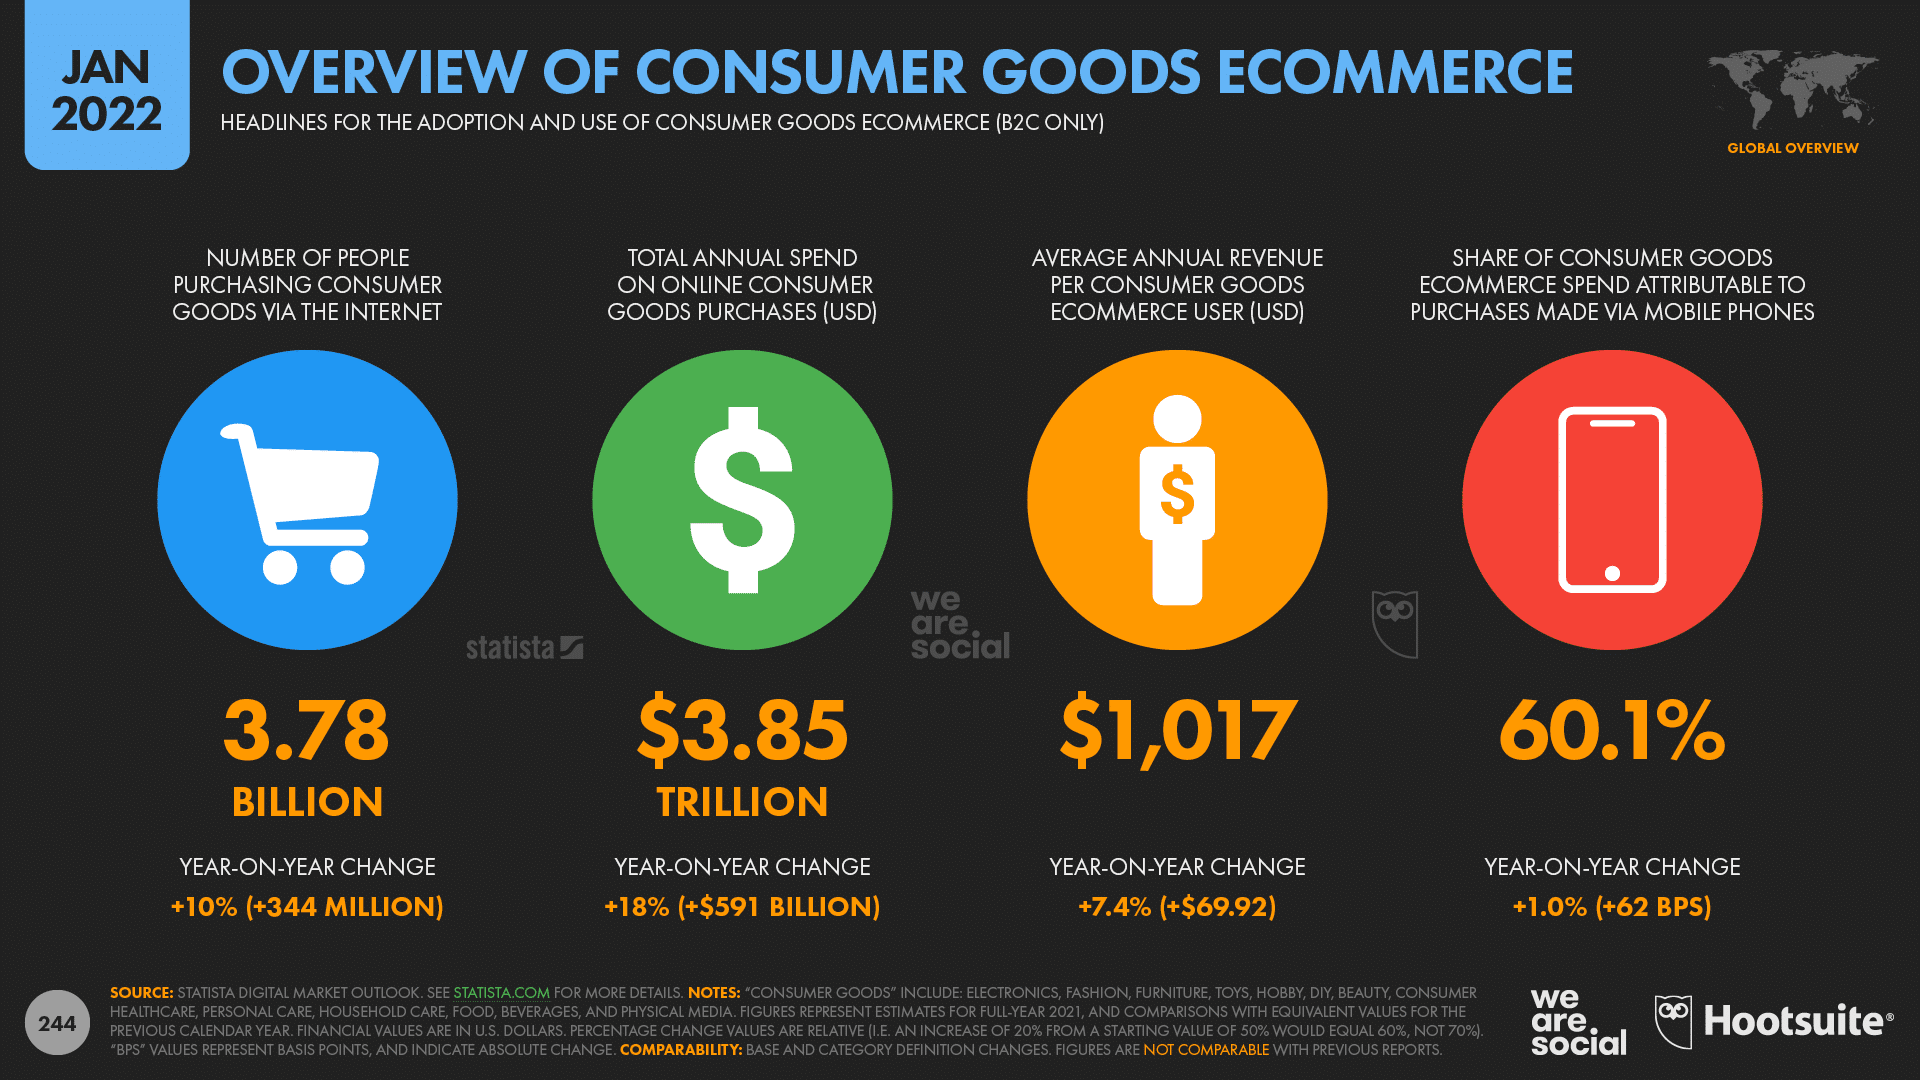 chart showing overview of consumer goods ecommerce